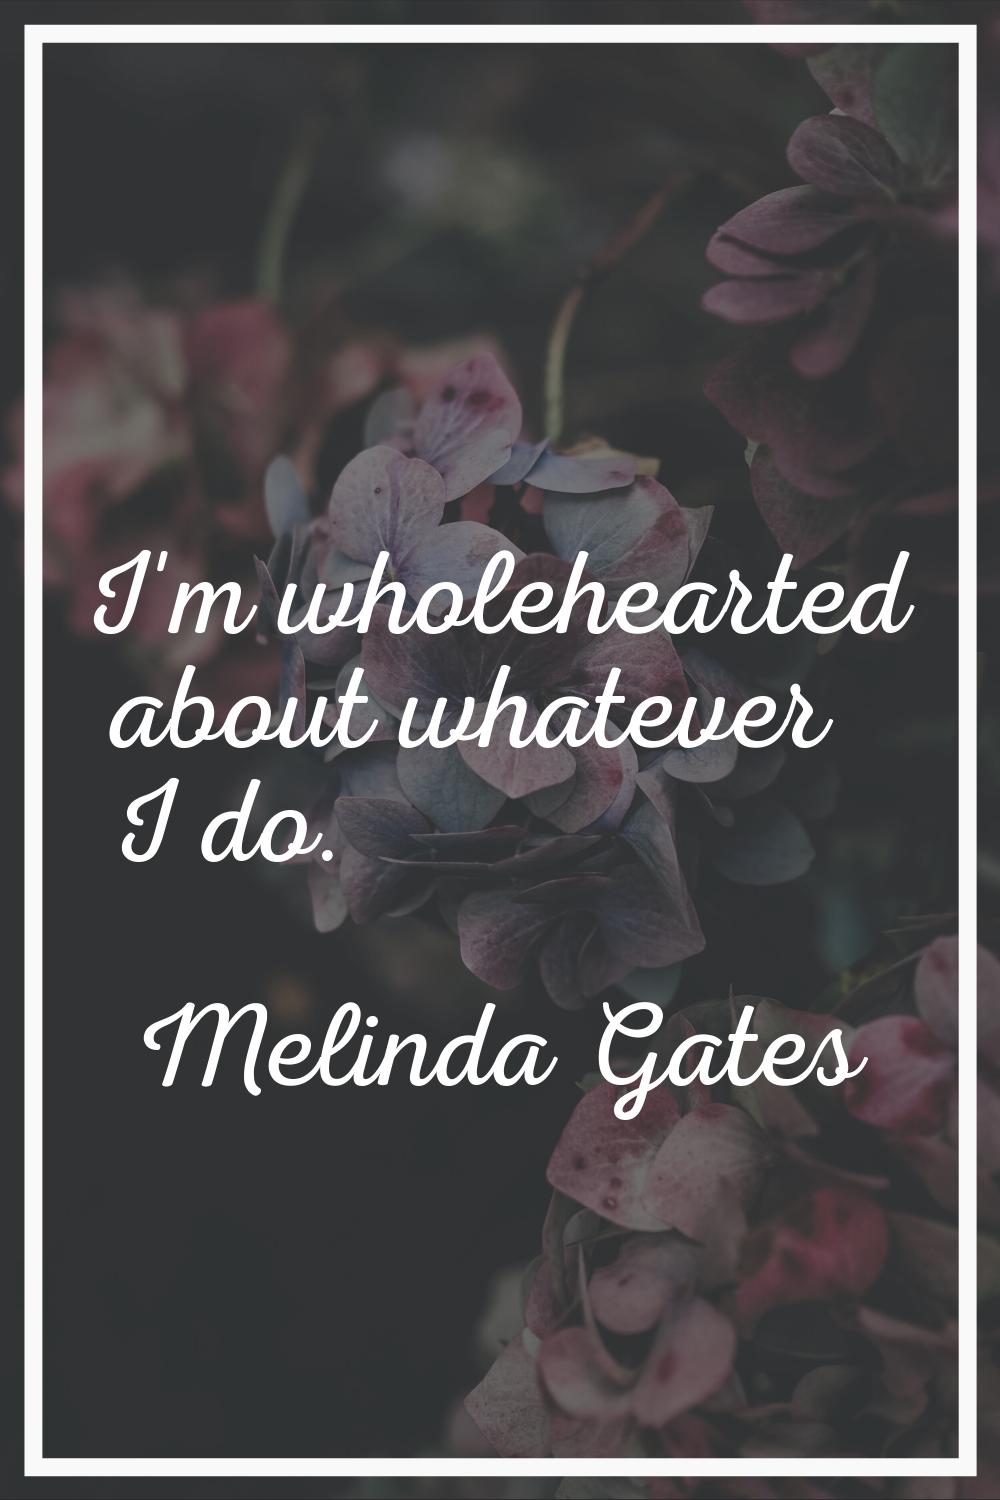 I'm wholehearted about whatever I do.